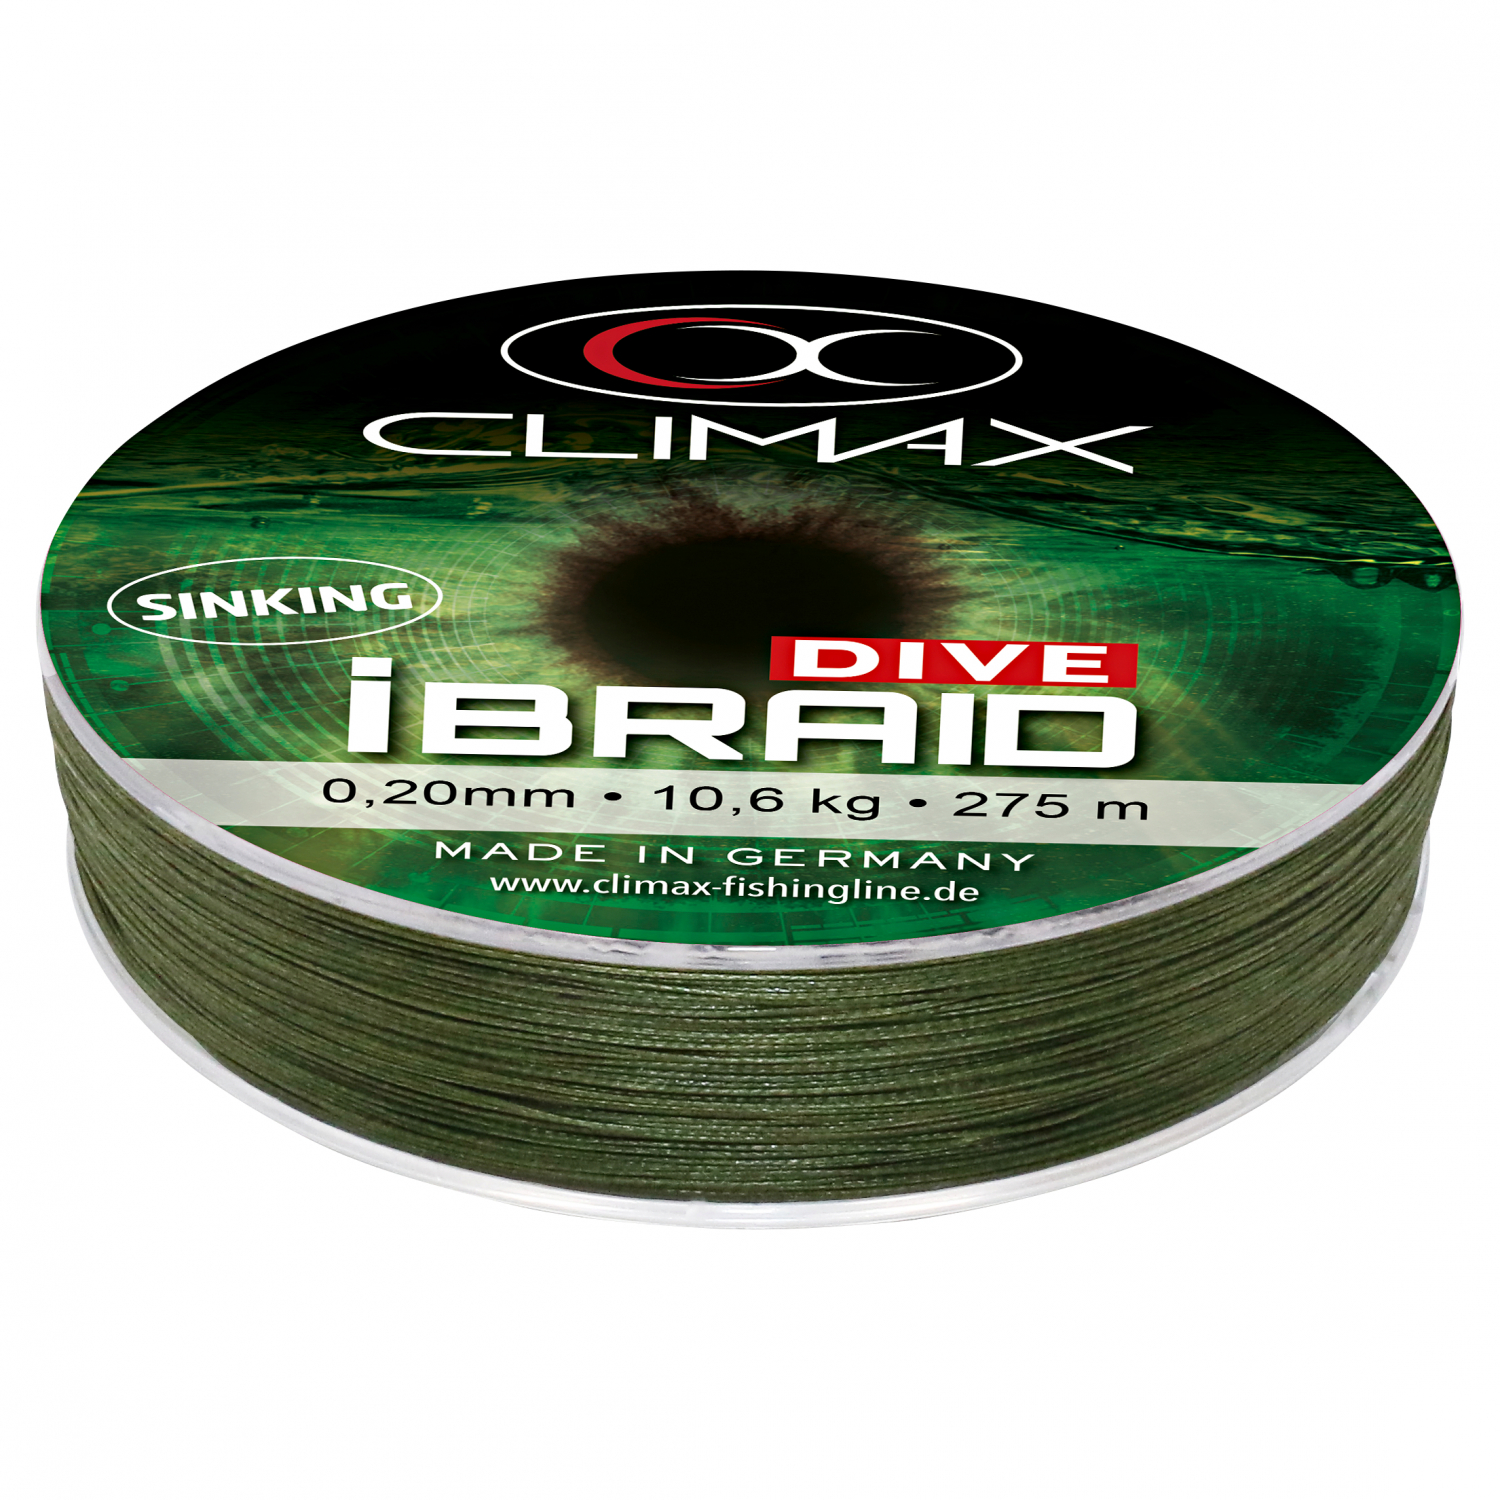 Climax Fishing line iBraid Dive (olive) 